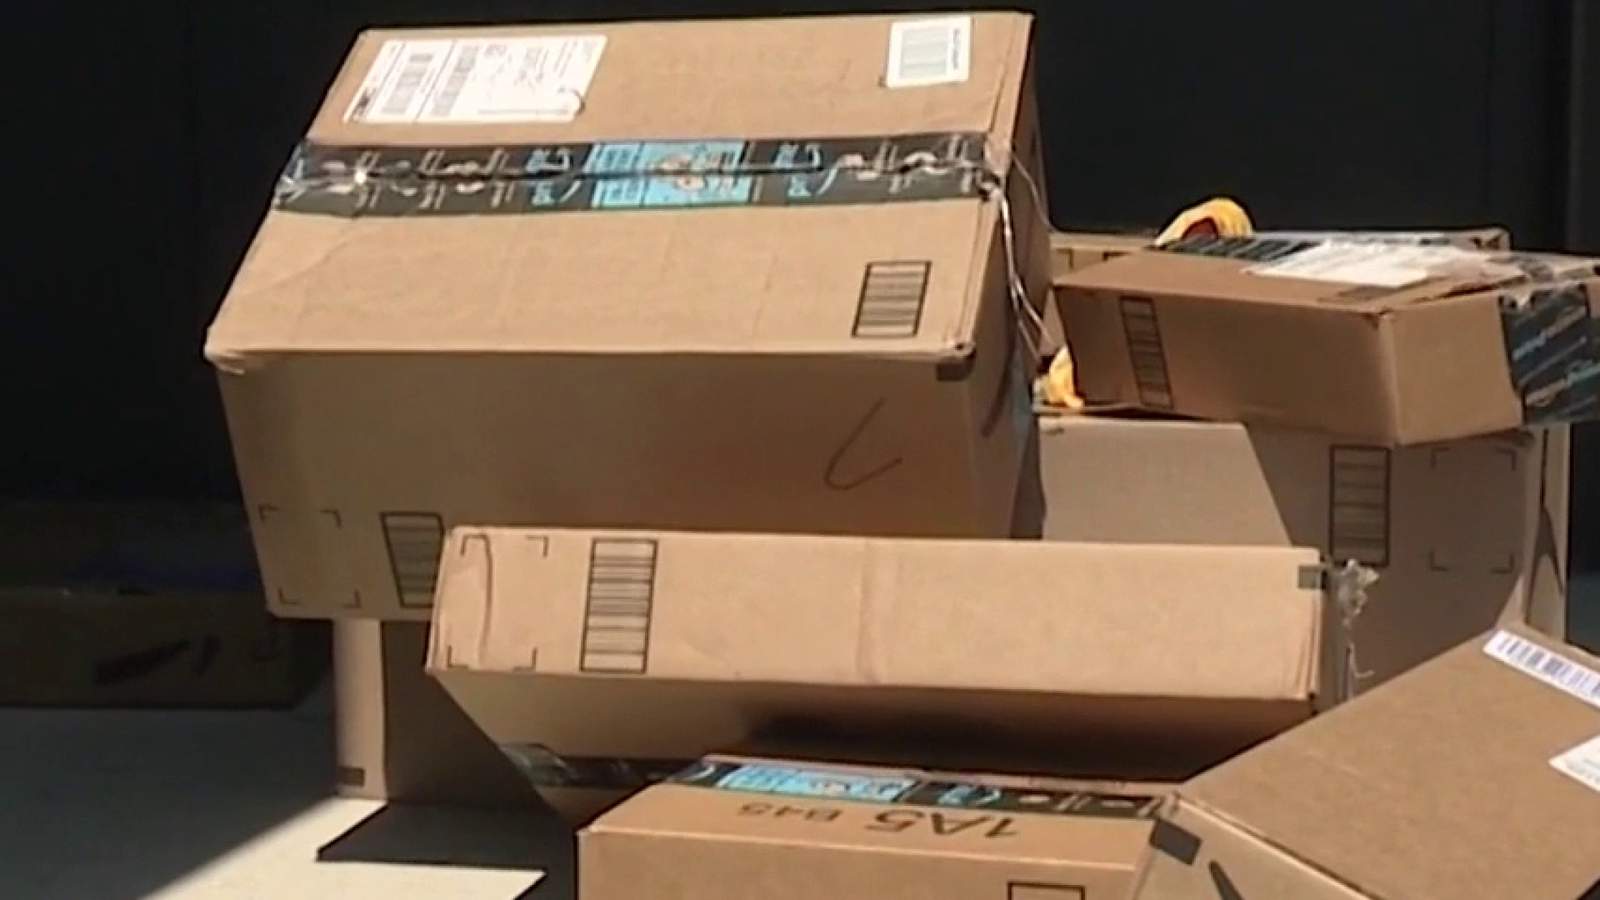 Whats behind unordered Amazon packages showing up on porches?